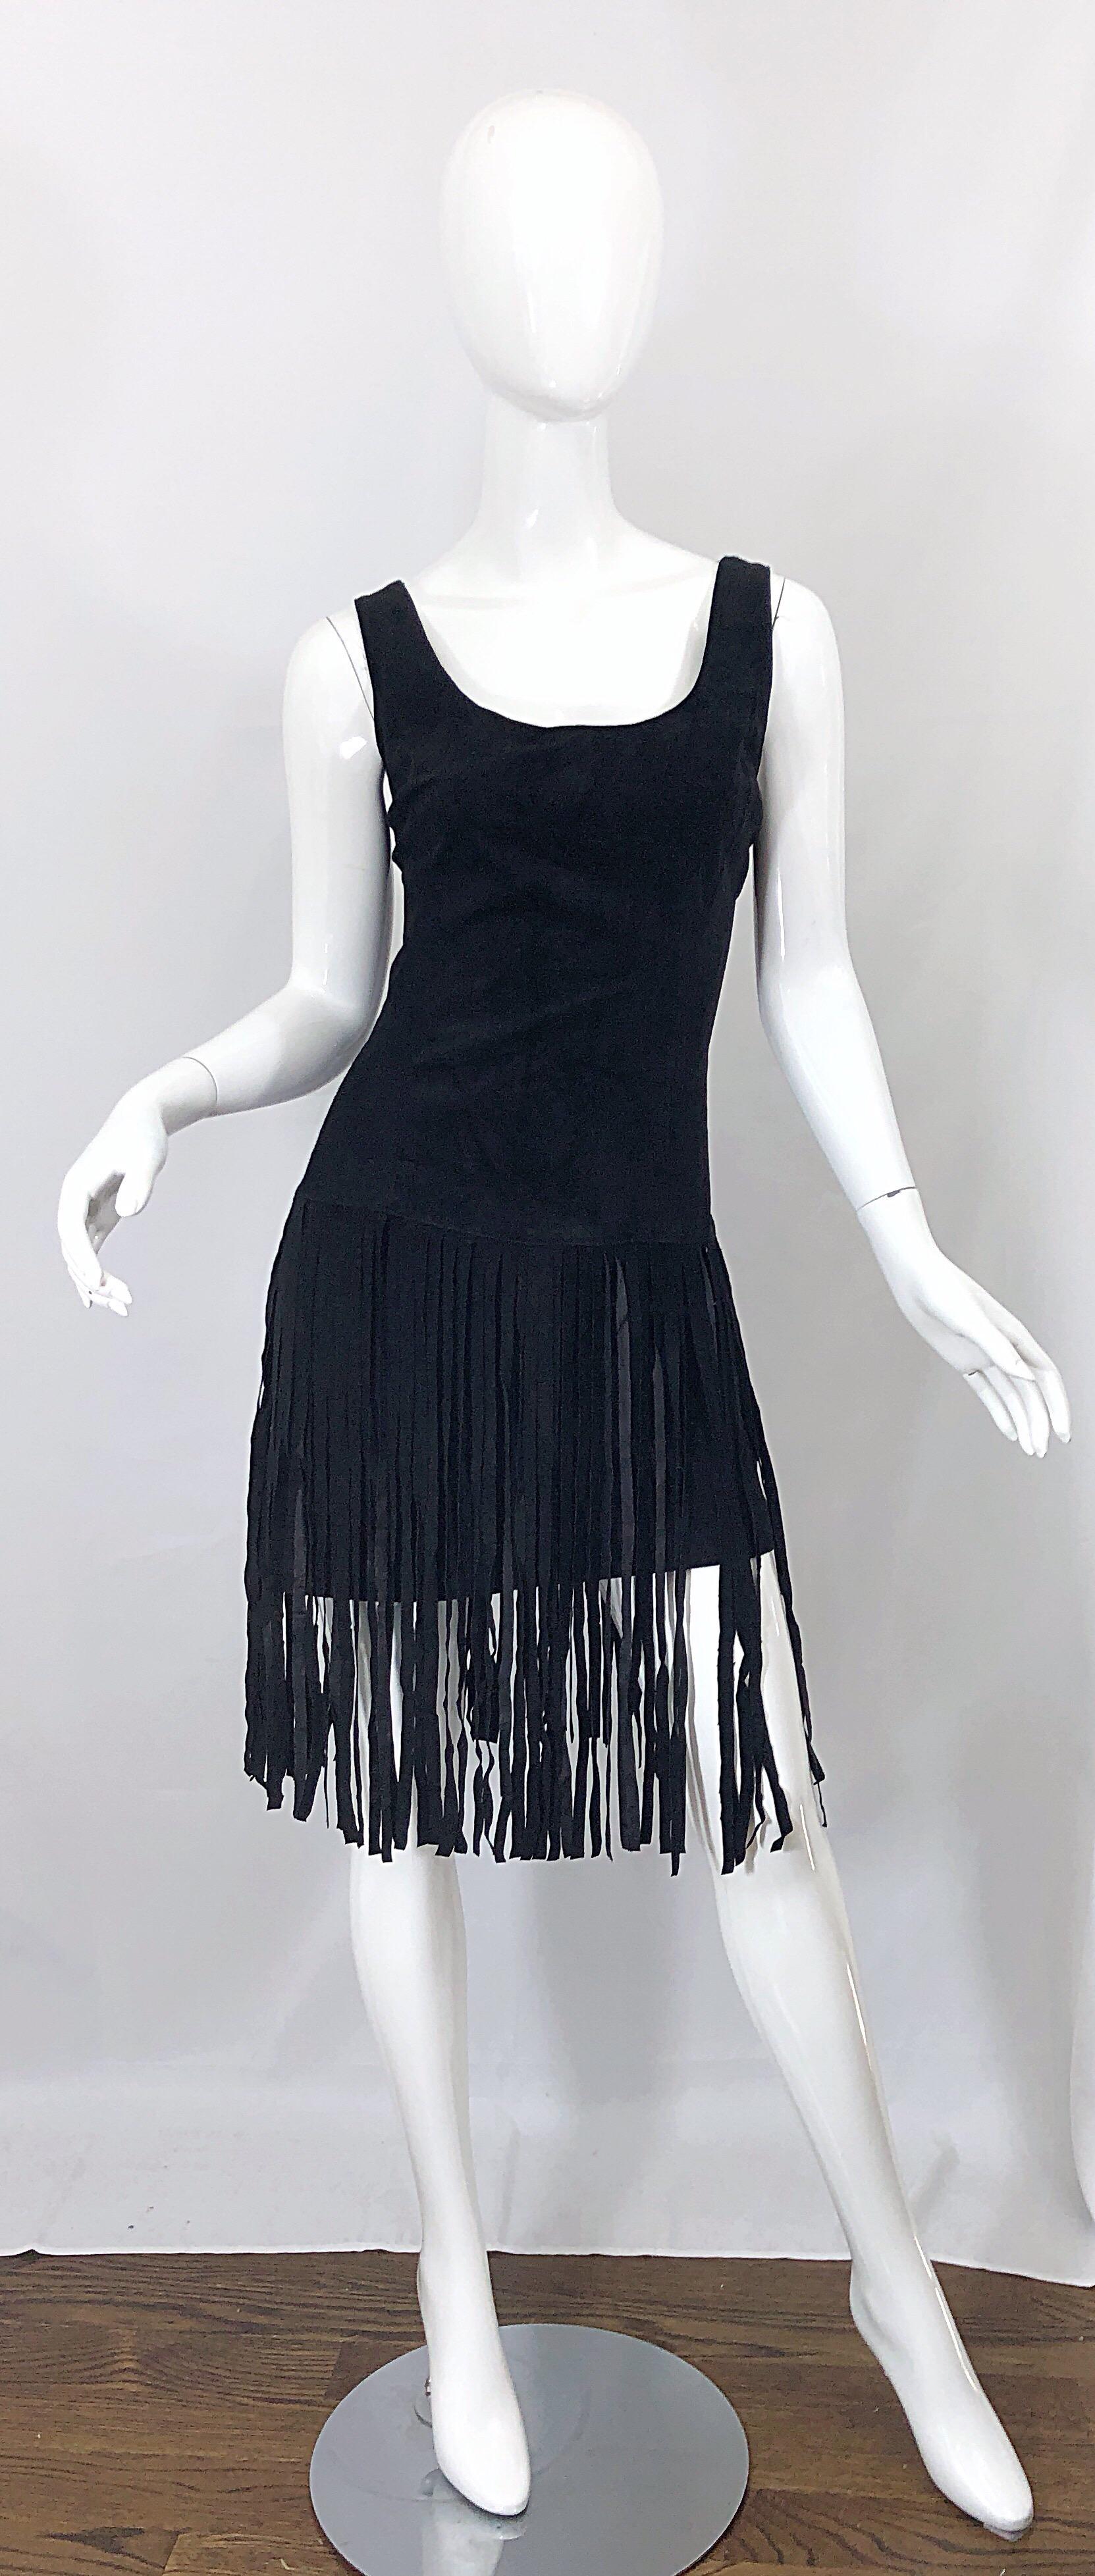 Amazing EREZ for LILLIE RUBIN Size 10 black suede leather fringe mini dress! Features a flattering tailored body with black suede fringe that is sewn on the low waistband. Fully lined. Hidden zipper up the back with hook-and-eye closure. The perfect